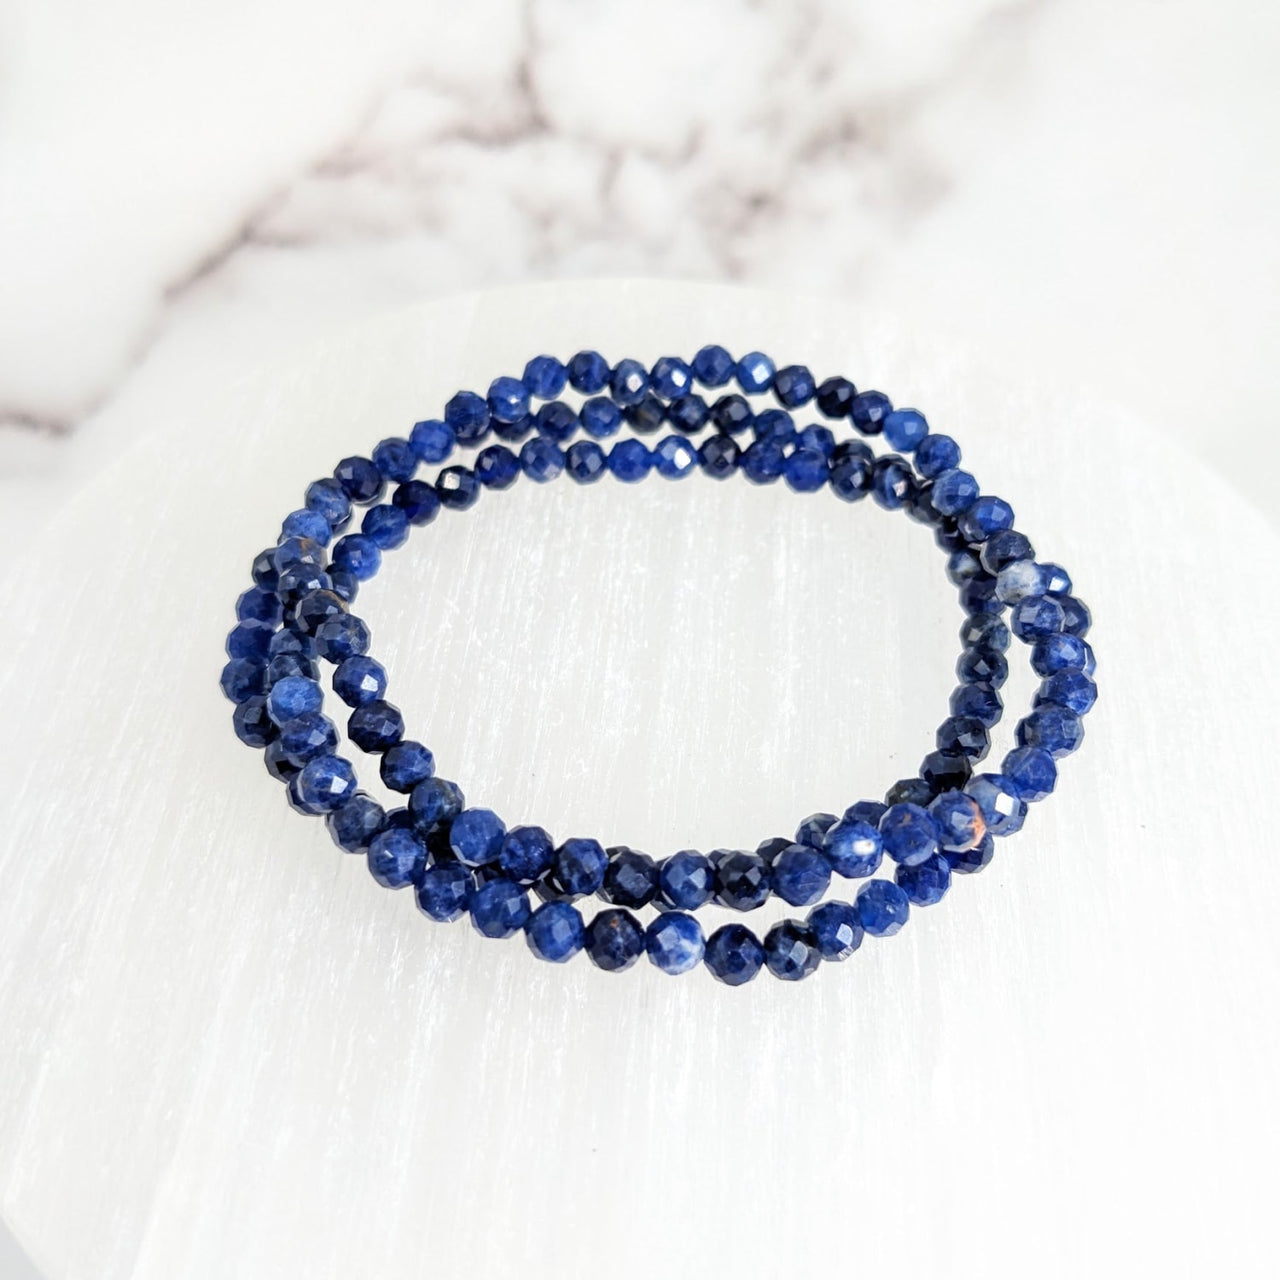 Close-up of Sodalite Faceted 7’ 4mm Bead Bracelet #LV2149 with blue beads on a marble surface